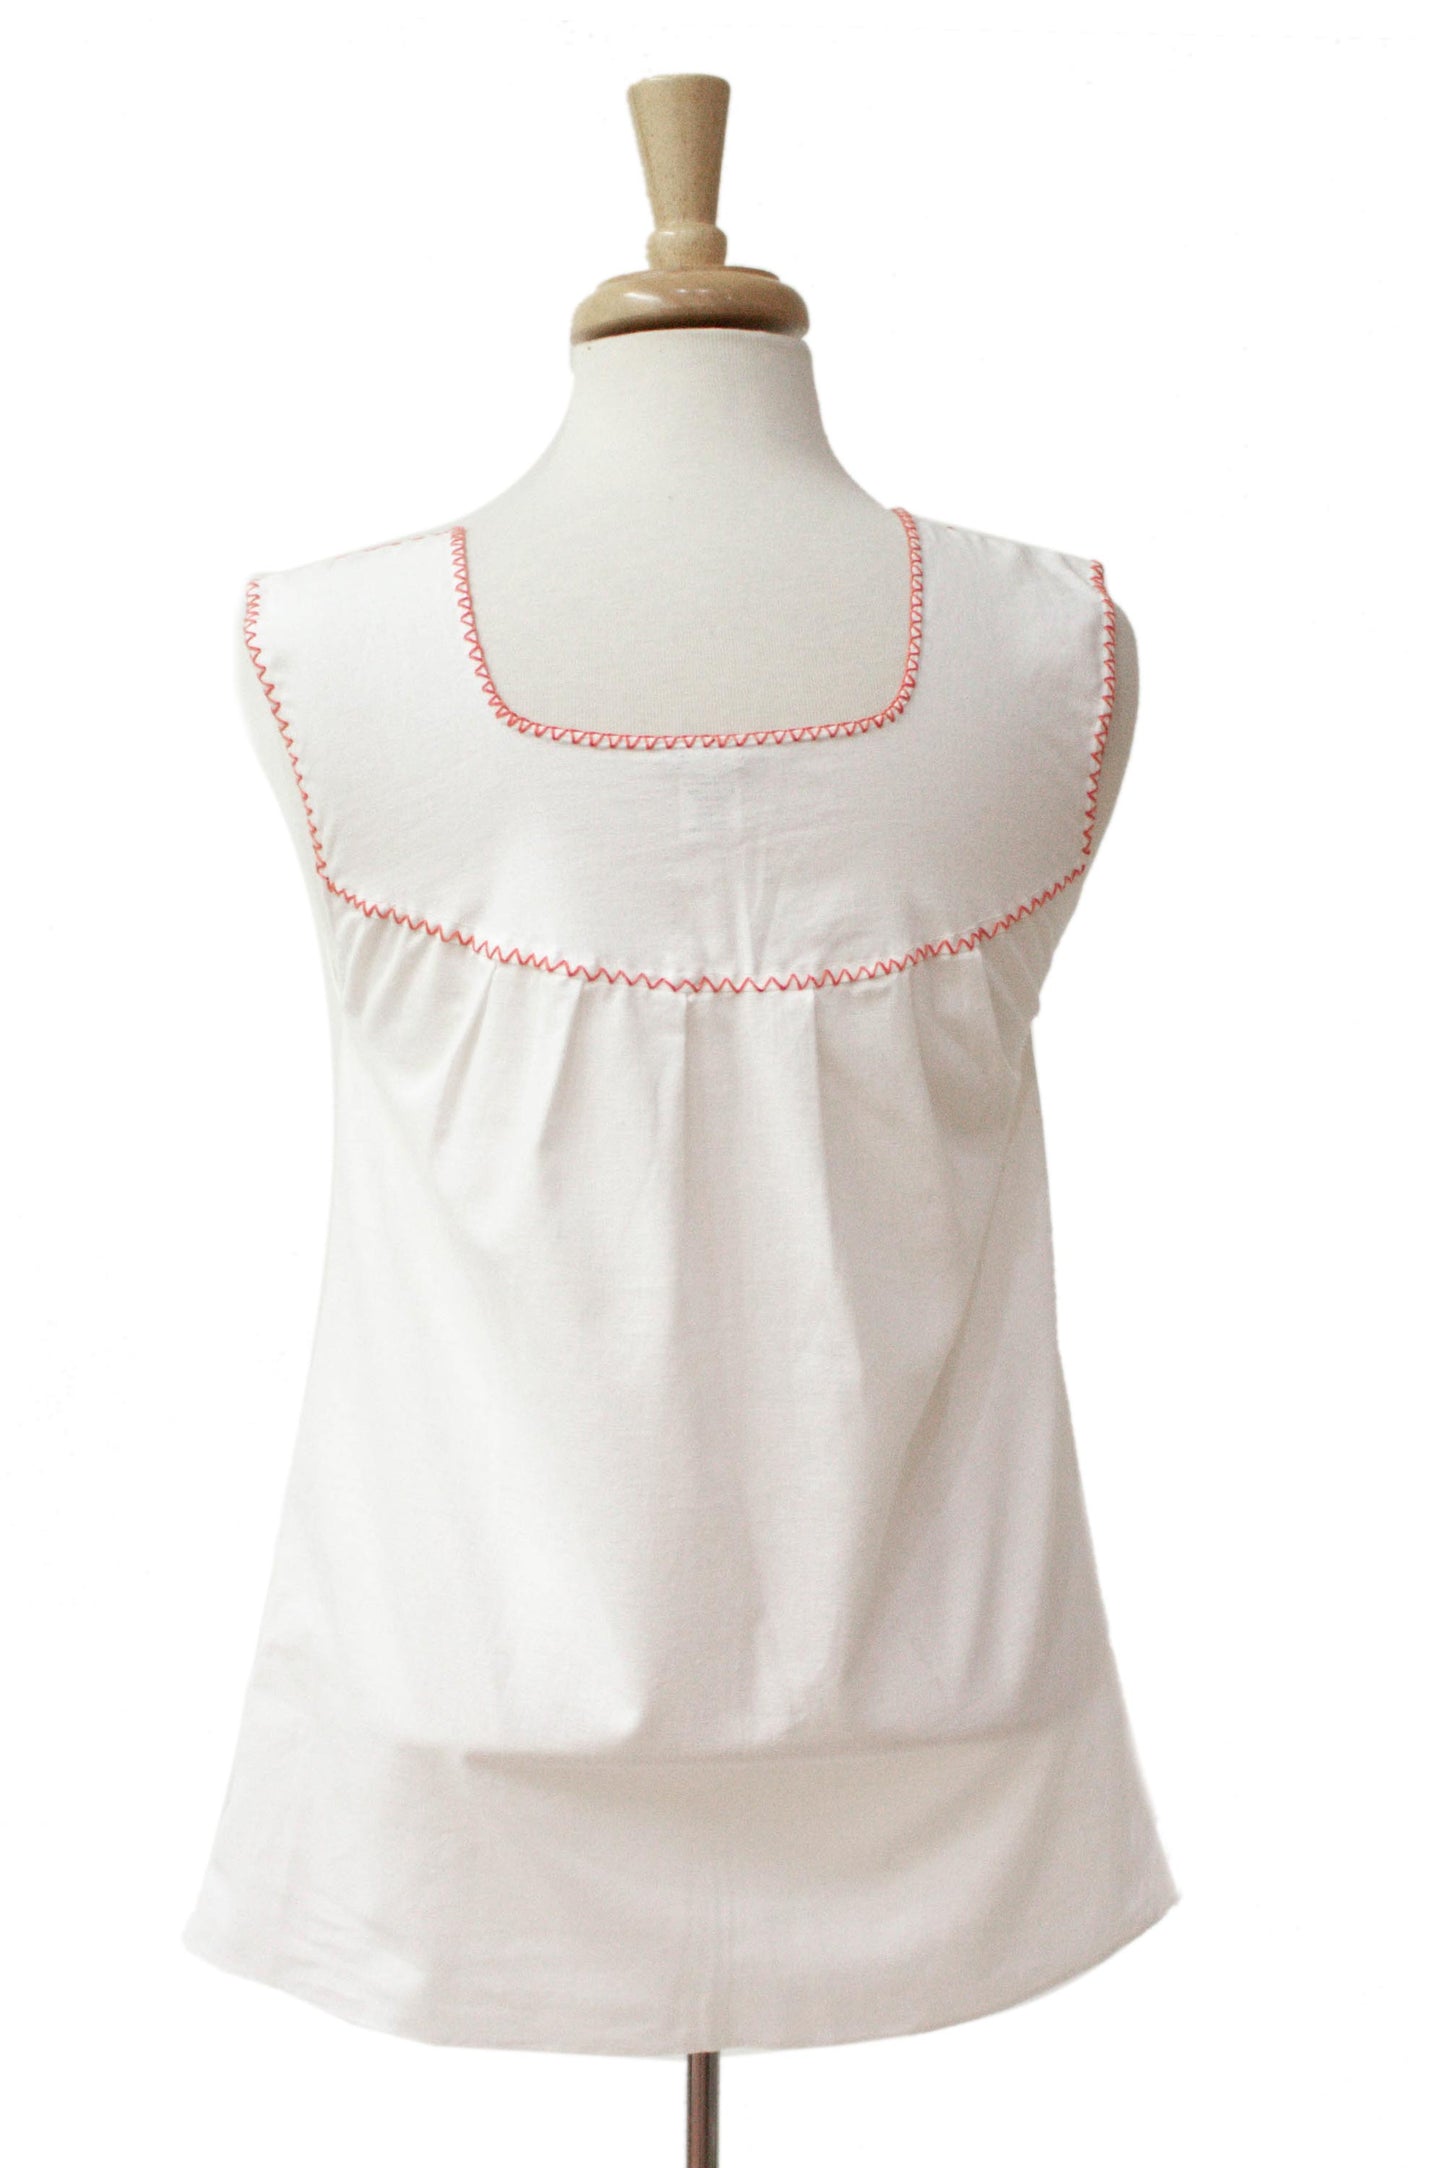 Flame Delight White and Flame Embroidered Cotton Blouse from Mexico